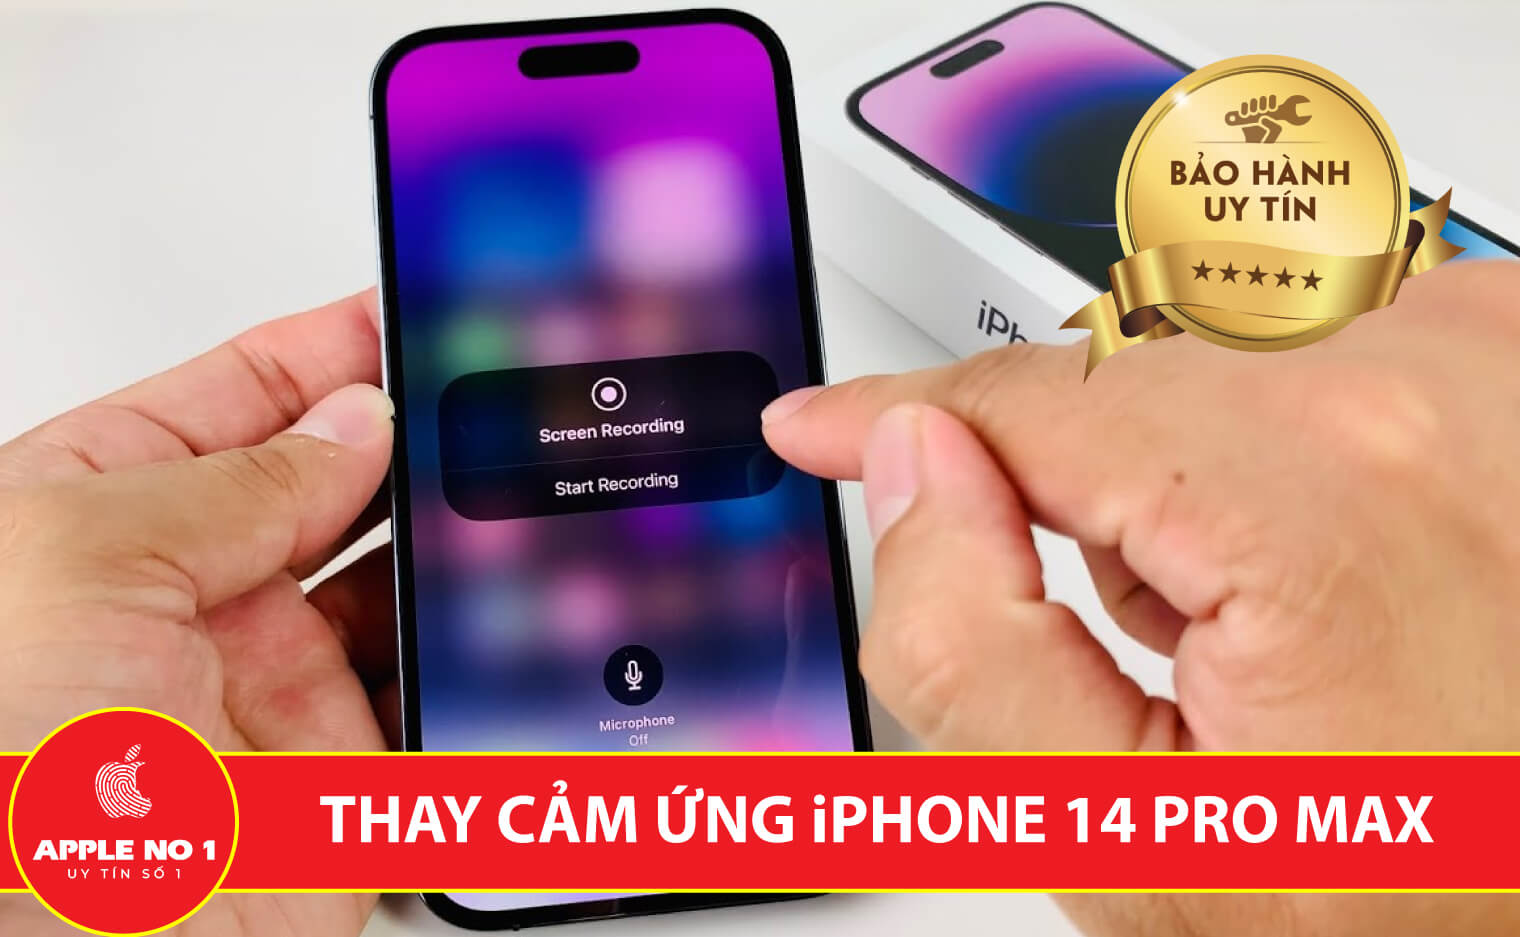 thay kinh cam ung iphone 14 pro max Ha Noi